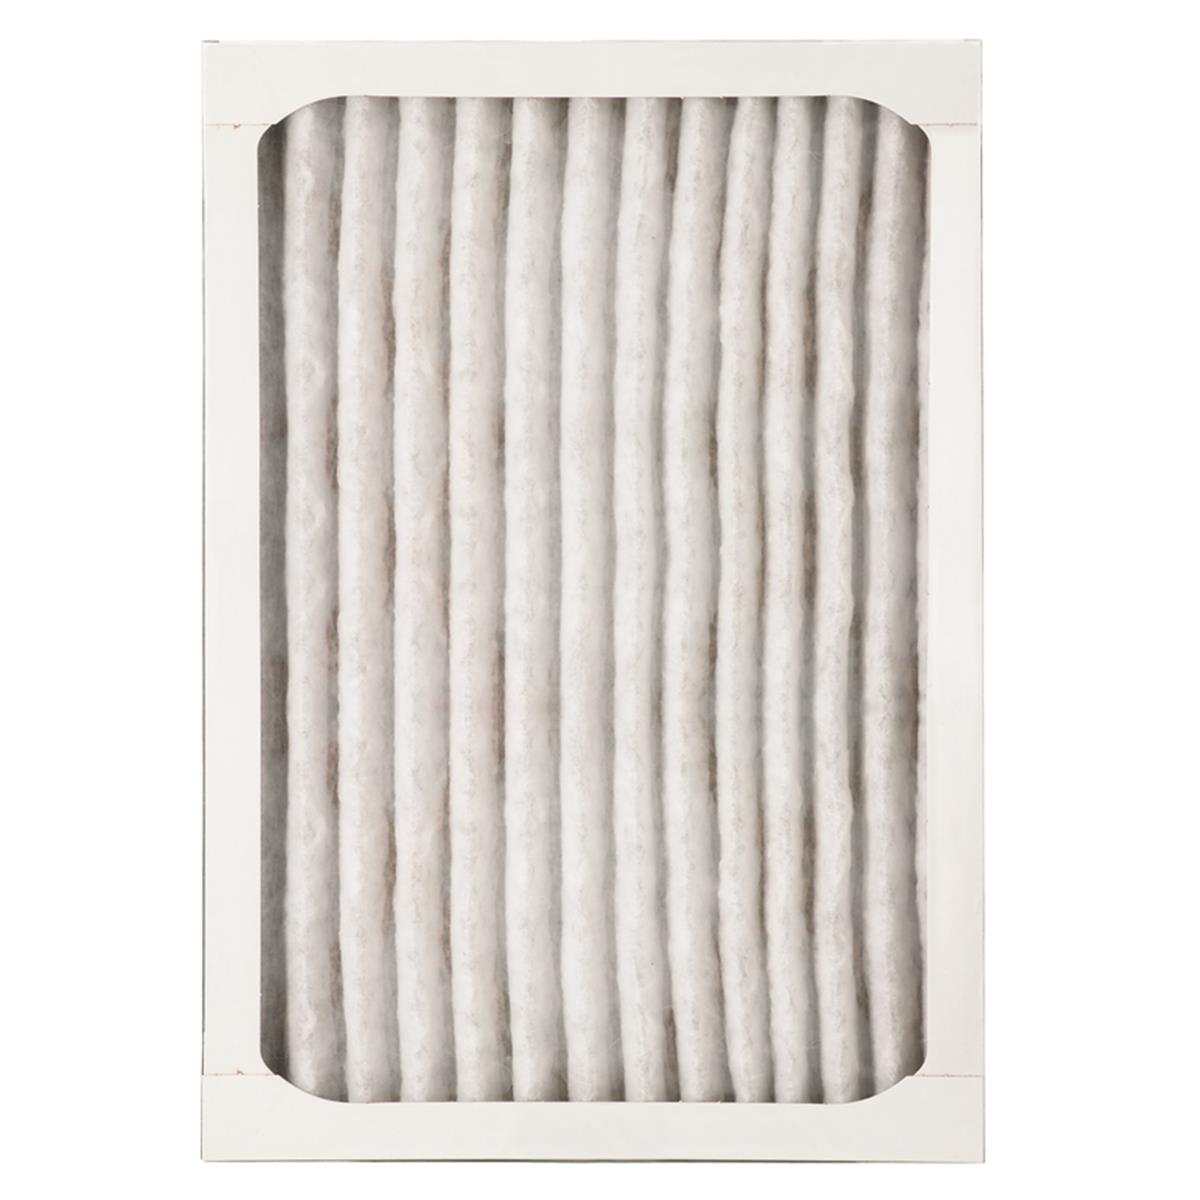 Picture of 3M 4314506 18 x 24 x 1 in. 300 MPR Air Filter - pack of 4